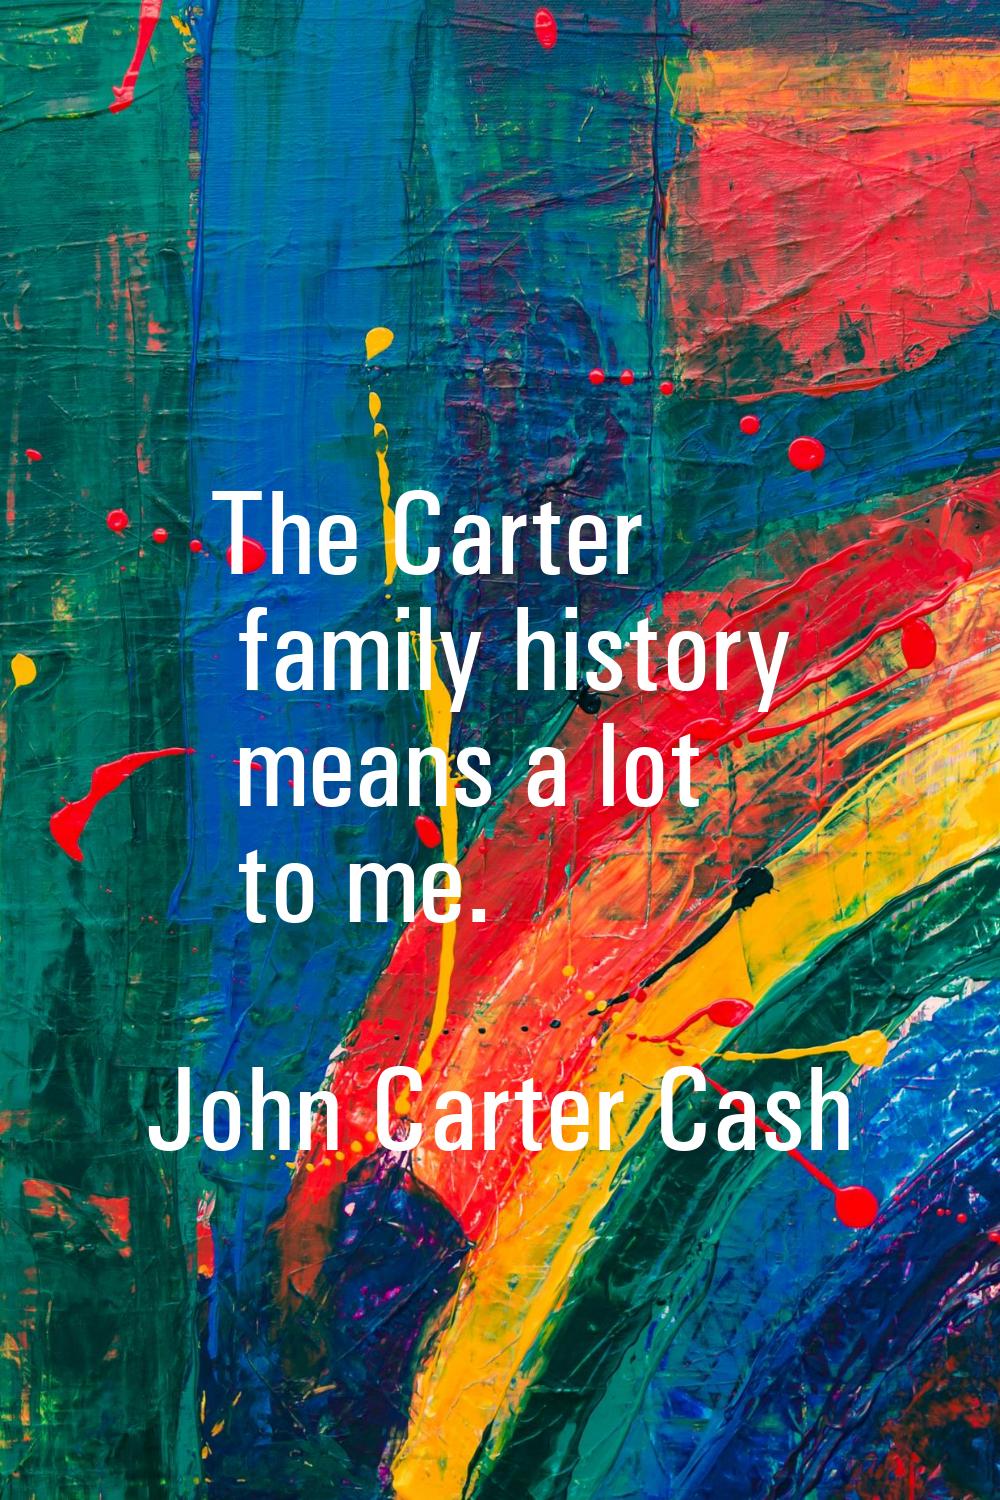 The Carter family history means a lot to me.